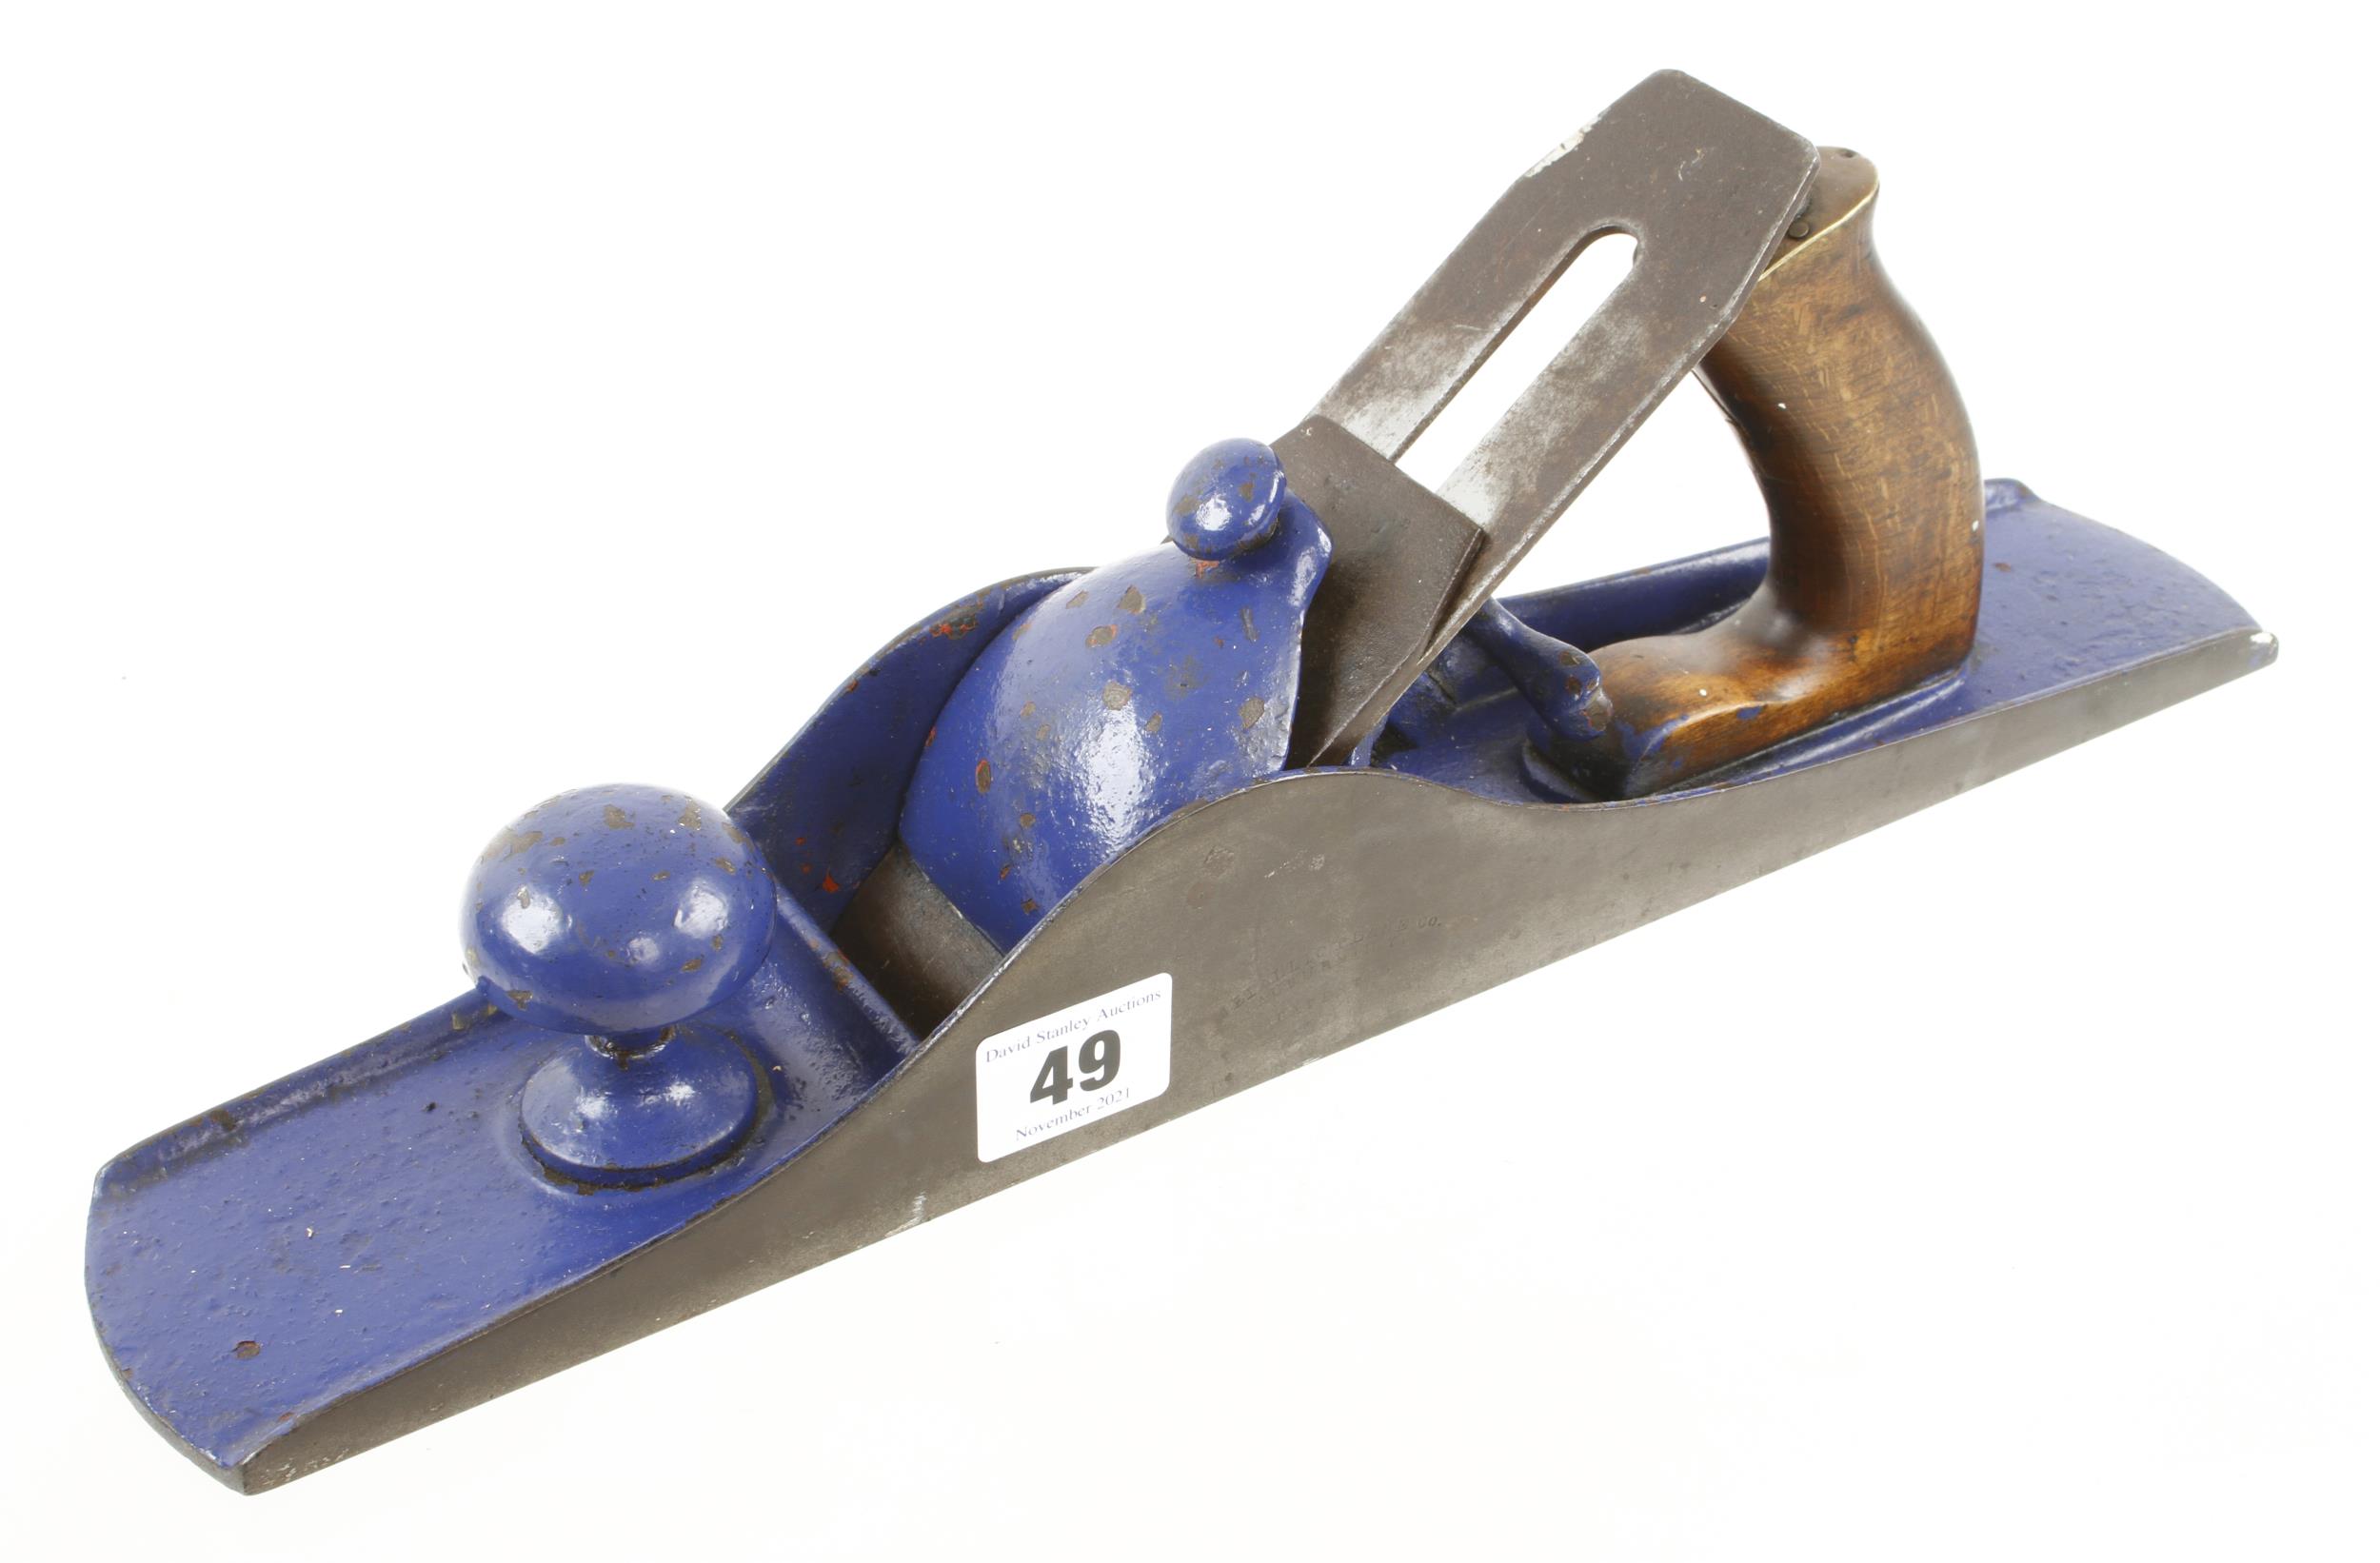 A rare adjustable jack plane by METALLIC PLANE Co USA with adjustable mouth and corrugated sole,